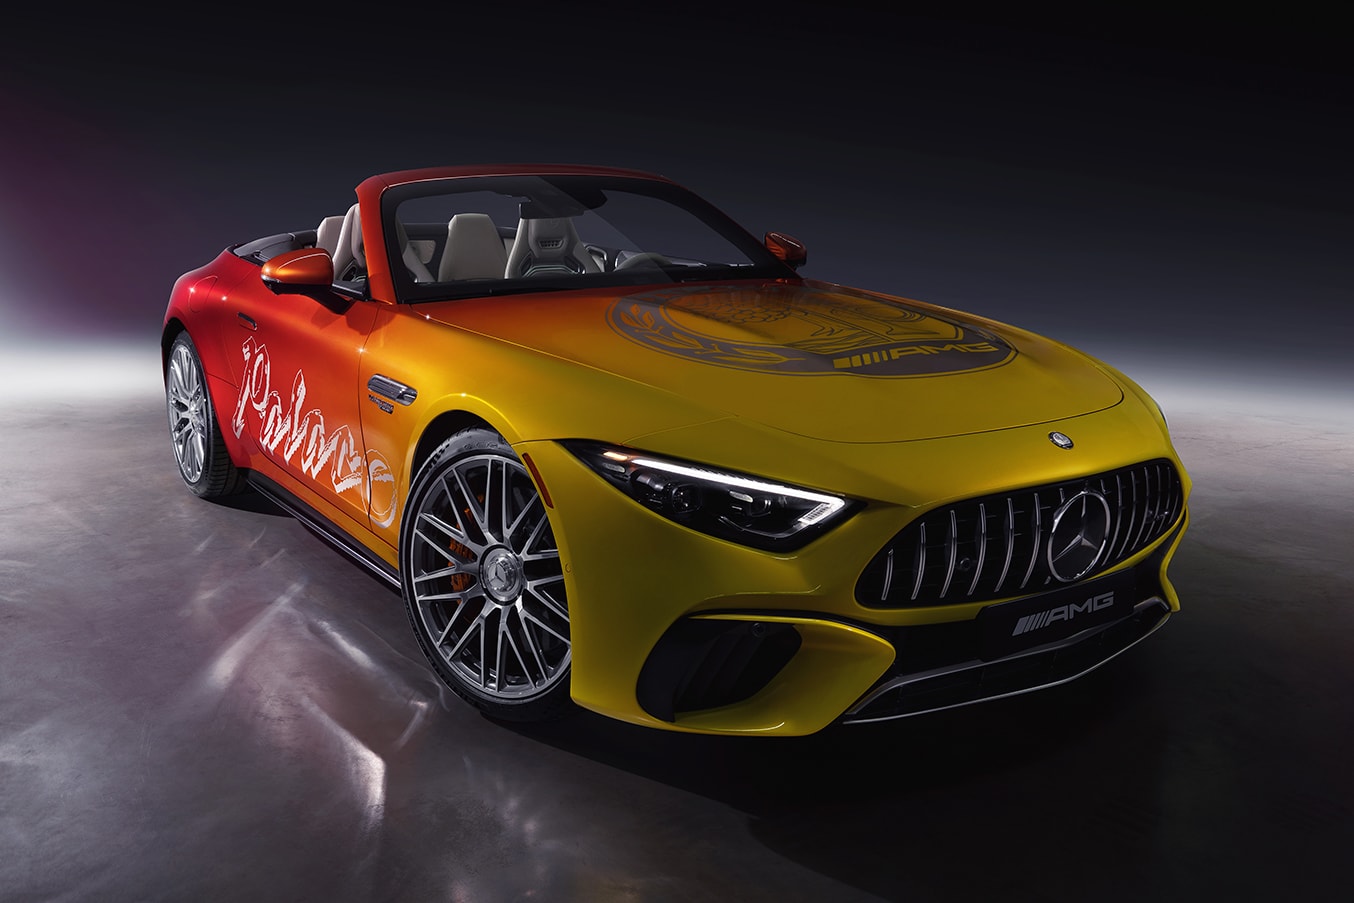 Mercedes-Benz to launch its most powerful AMG tomorrow: What to expect